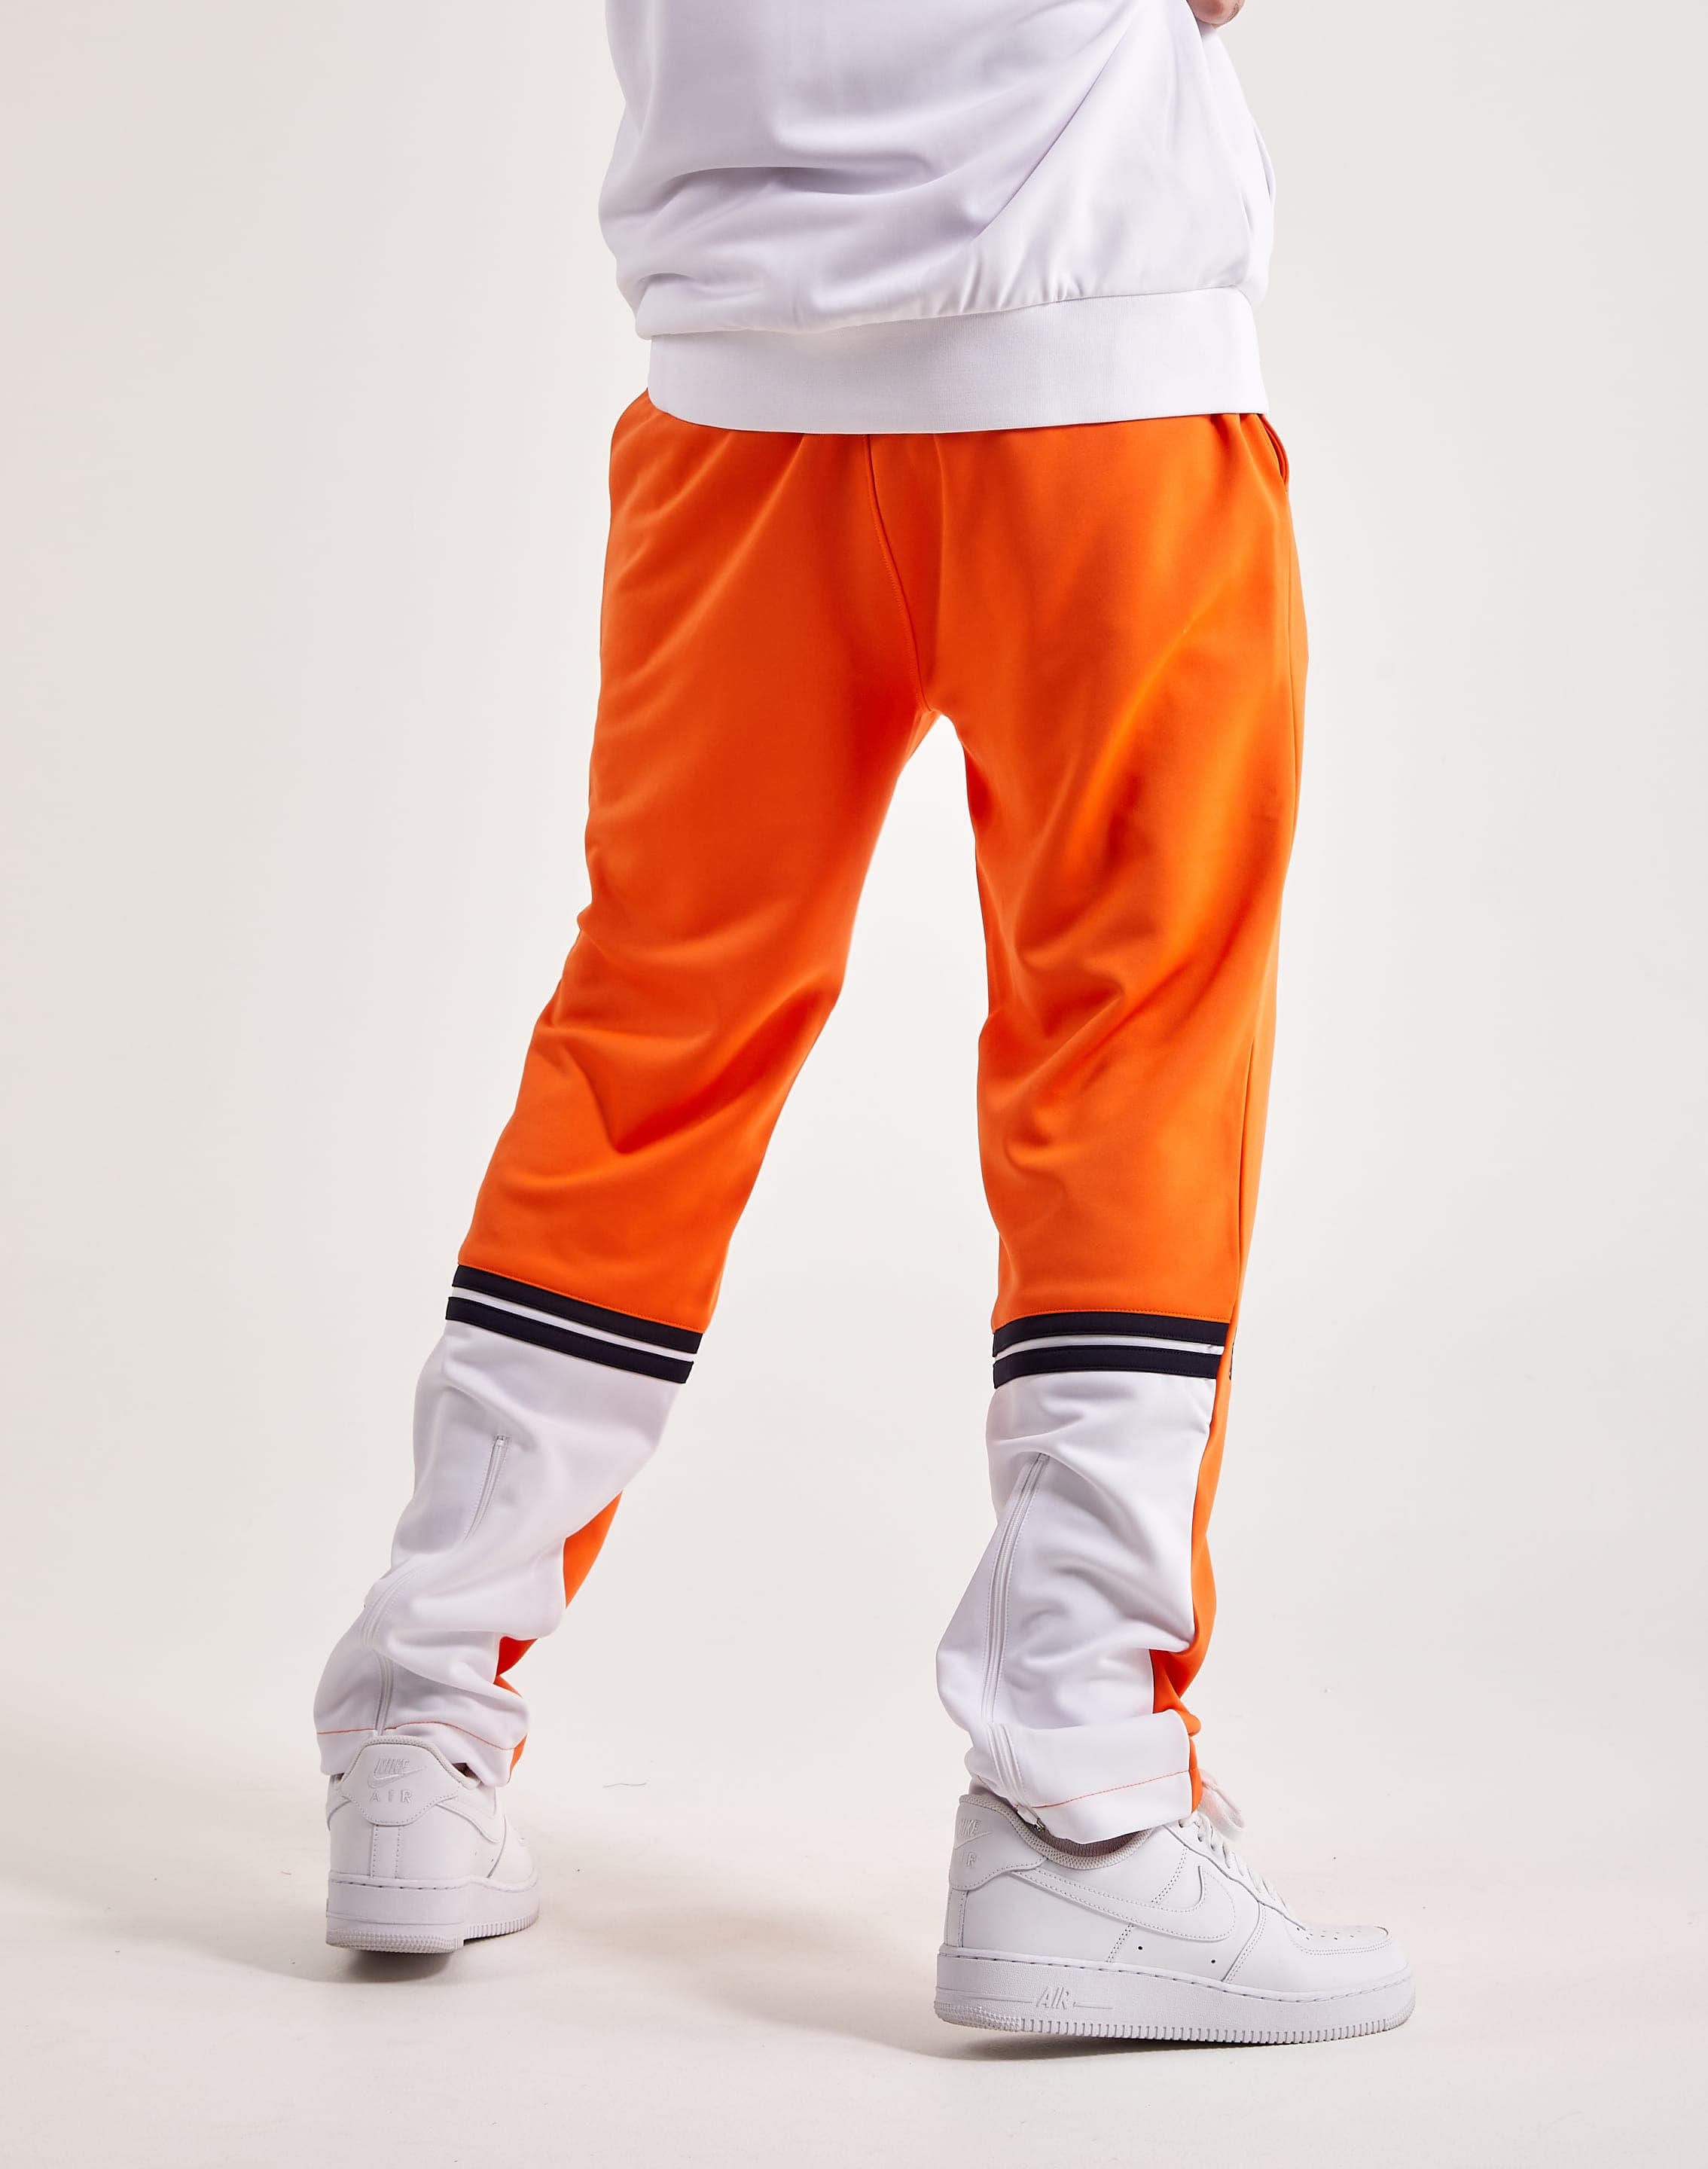 Sergio Tacchini Orion Track Pants – DTLR